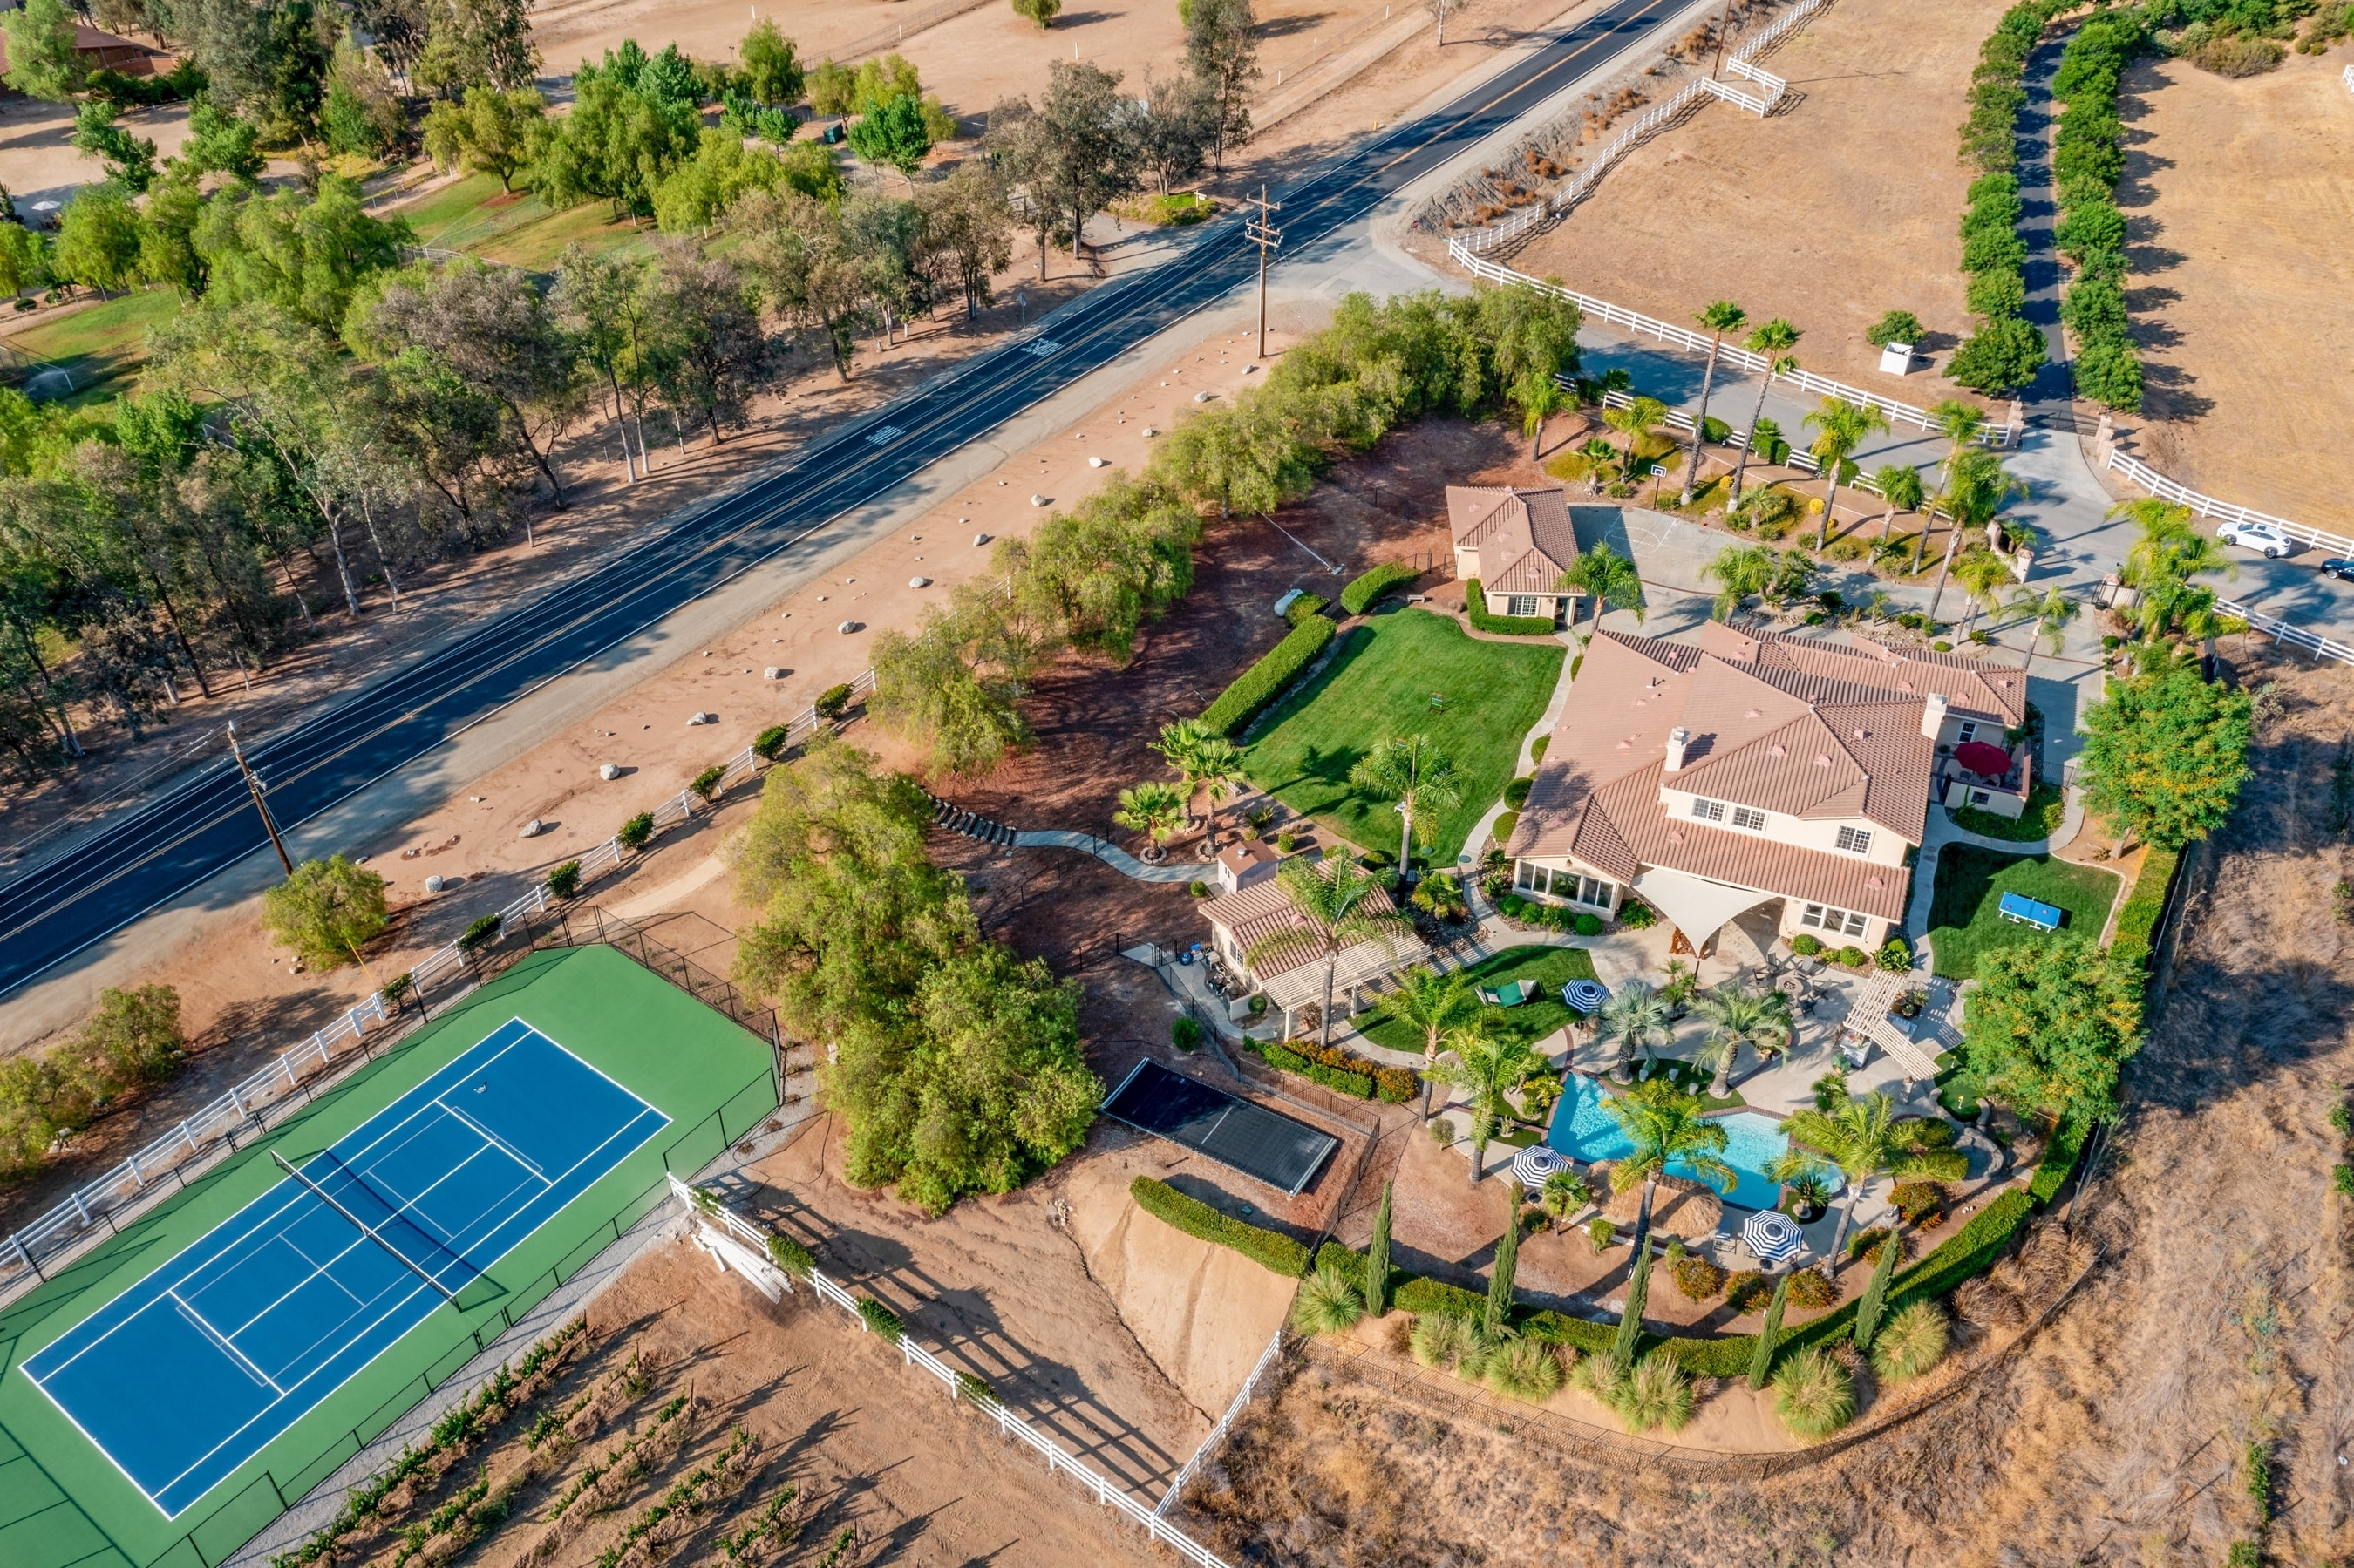 Amazing property with pool, spacious lawn, patio, basketball, putting green, and tennis court.